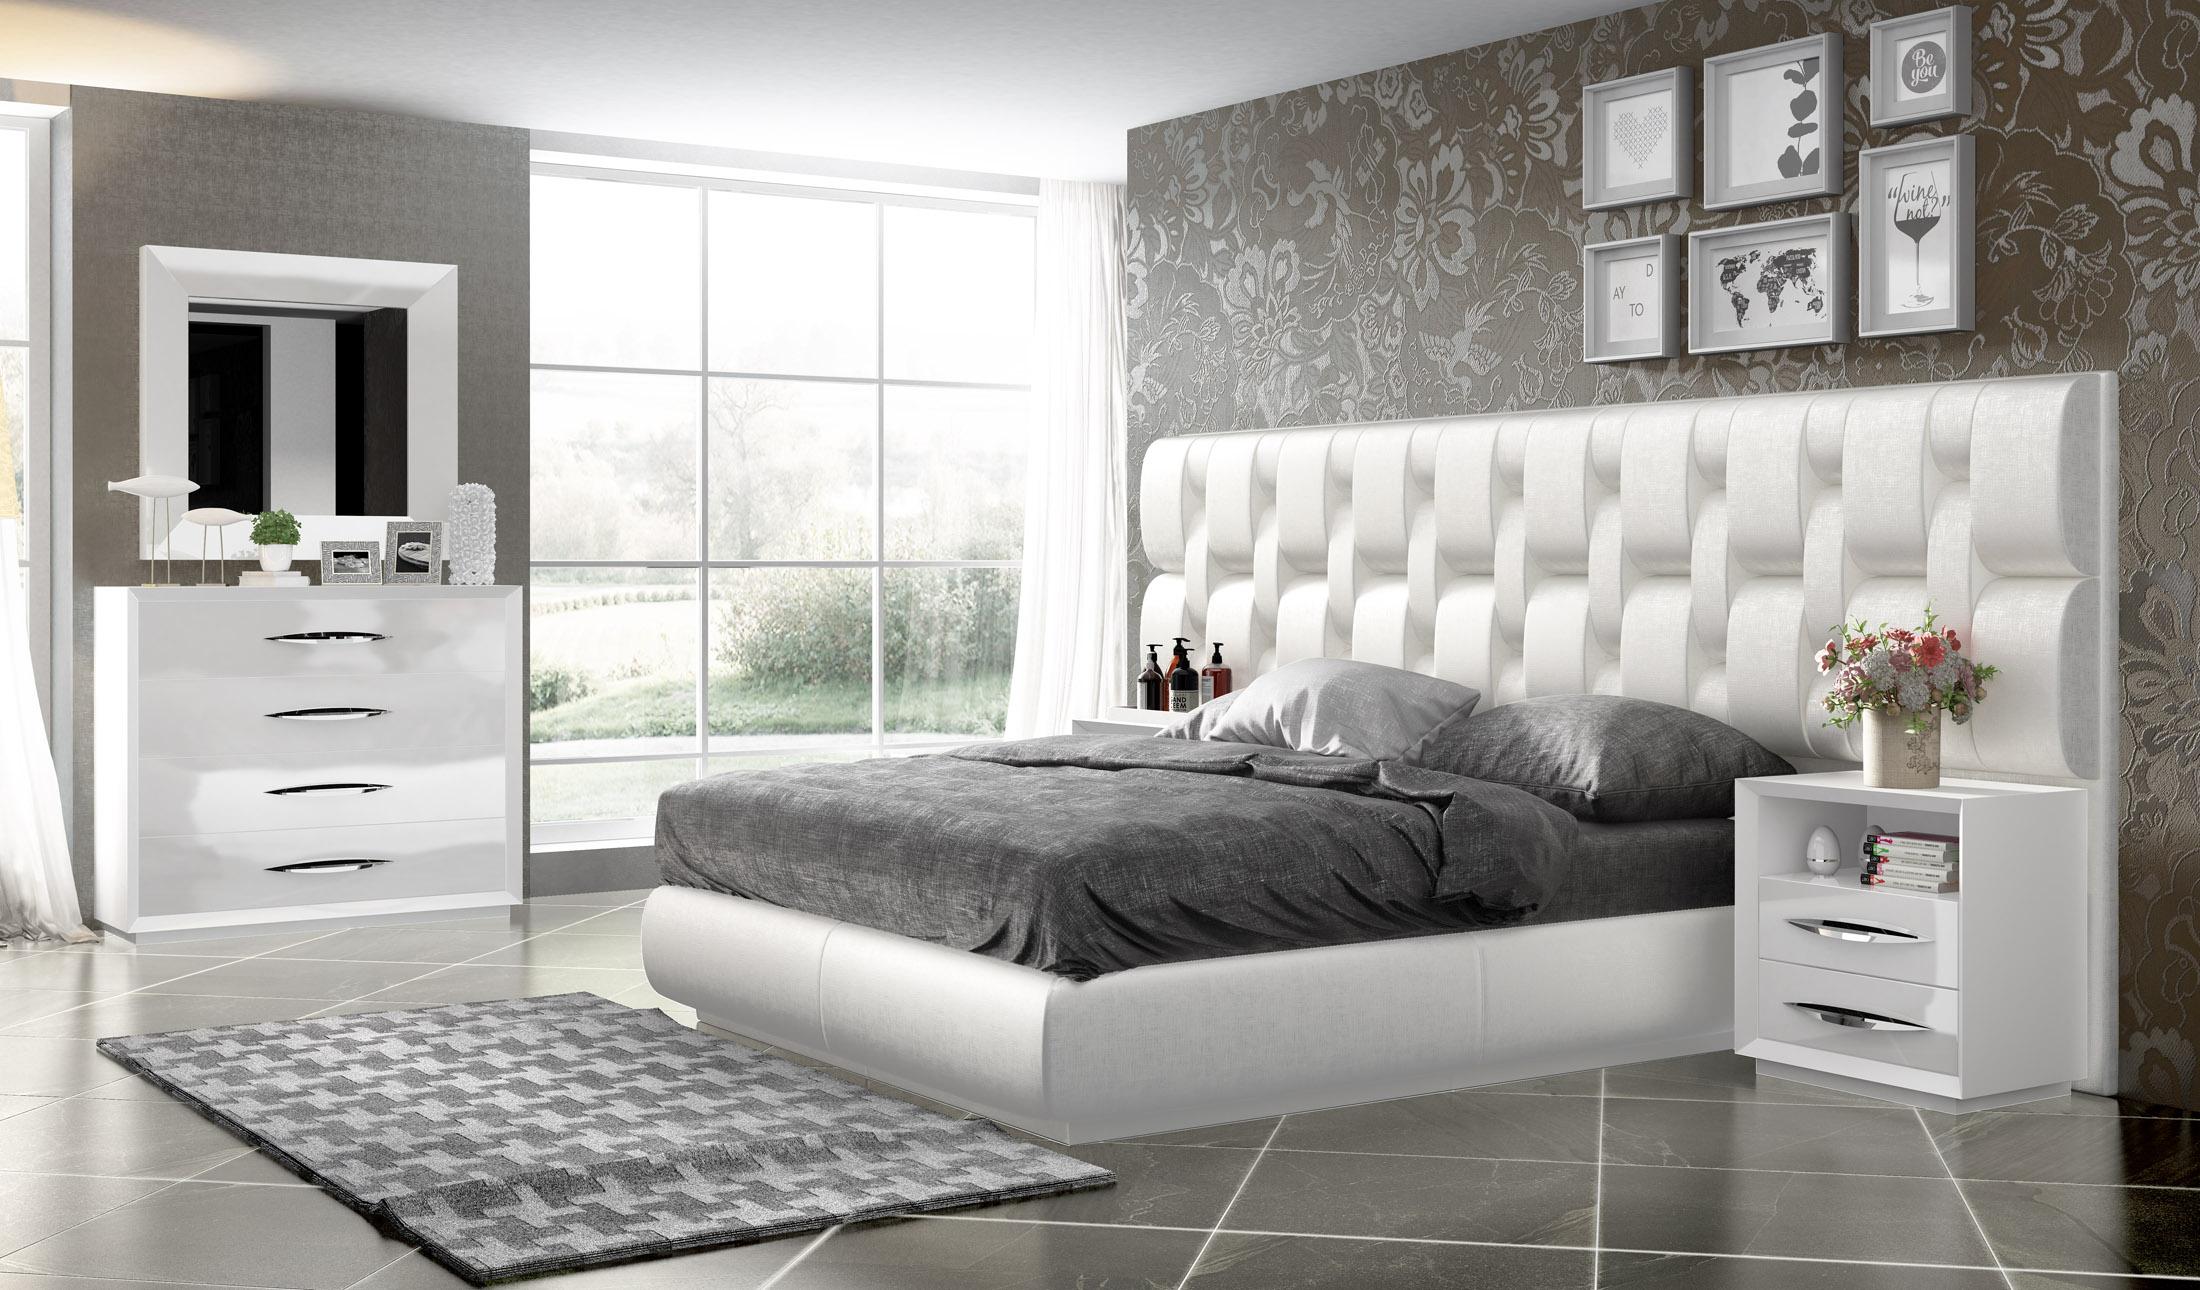 

    
Glam Glossy White Queen Bedroom Set 5P MADE IN SPAIN Contemporary ESF Emporio
